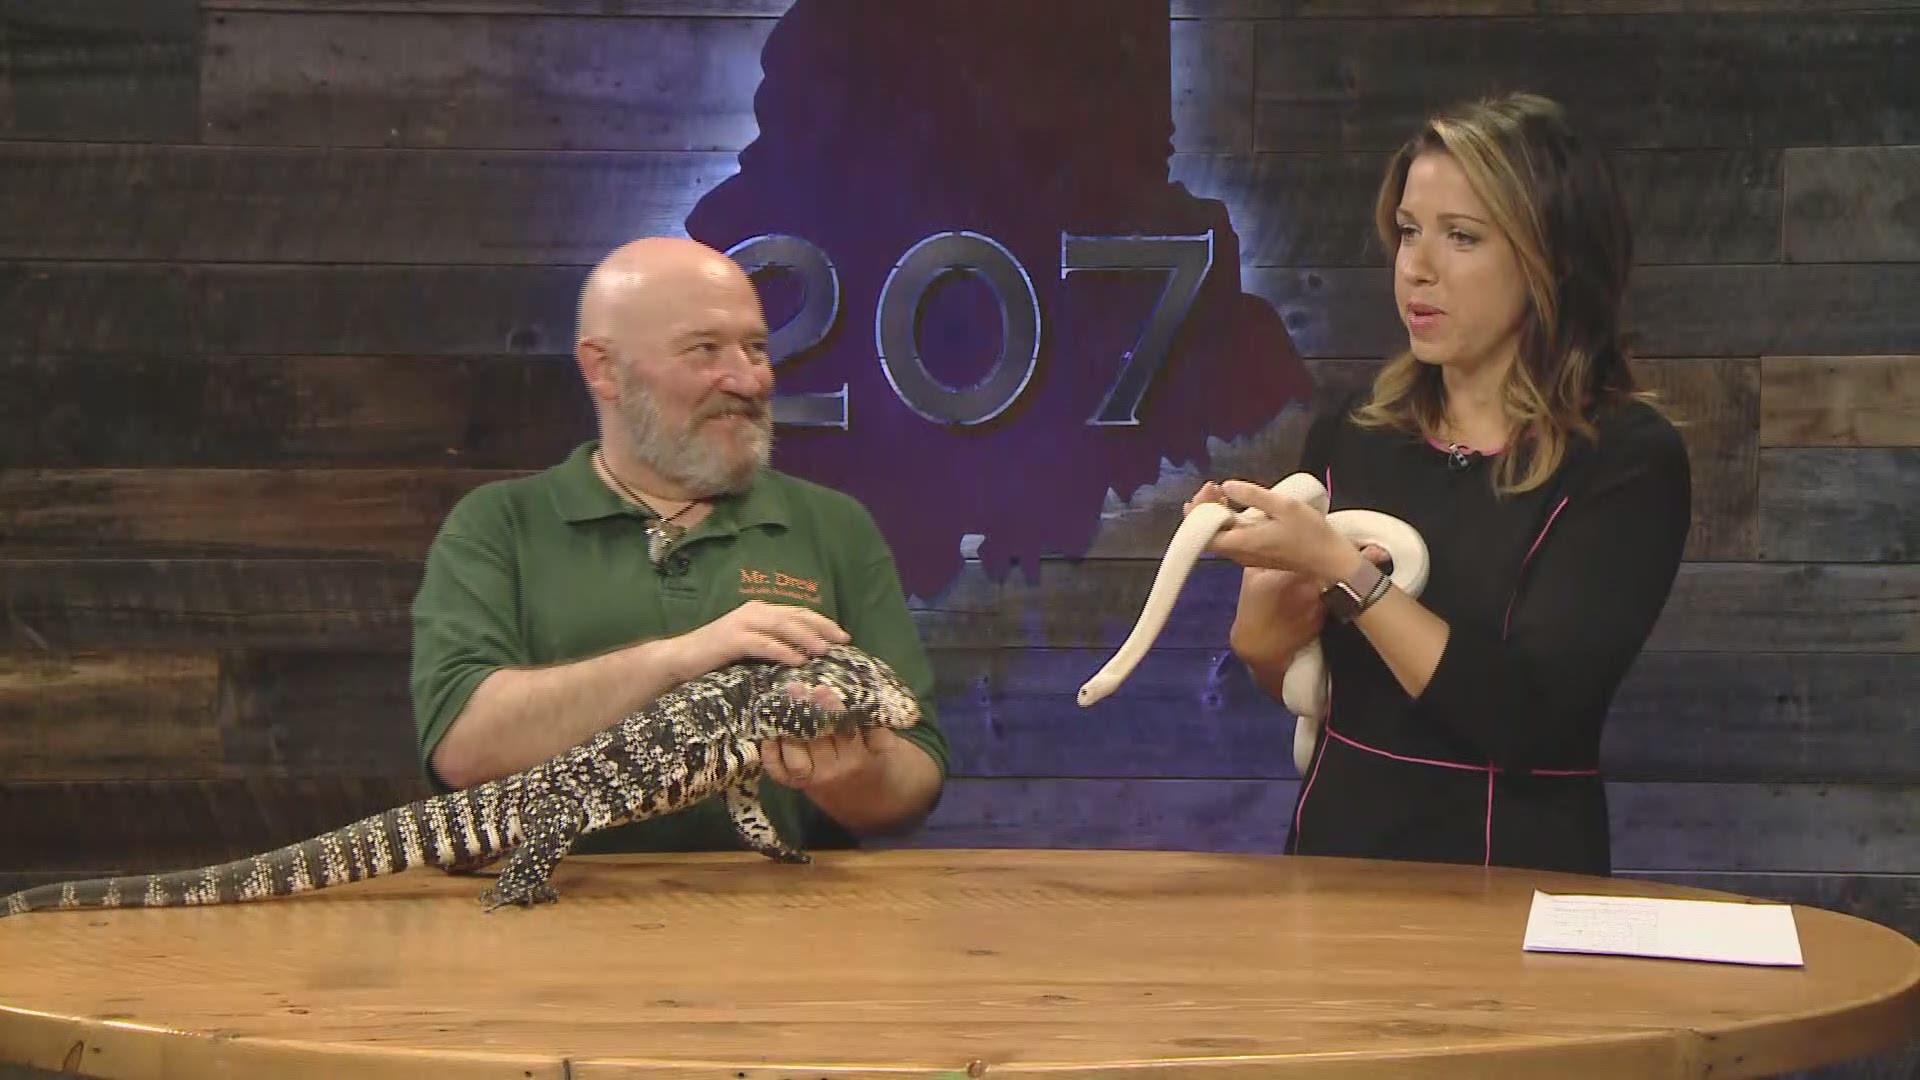 A snake, a tortoise, a tegu and a snapping turtle walked into the 207 studio...